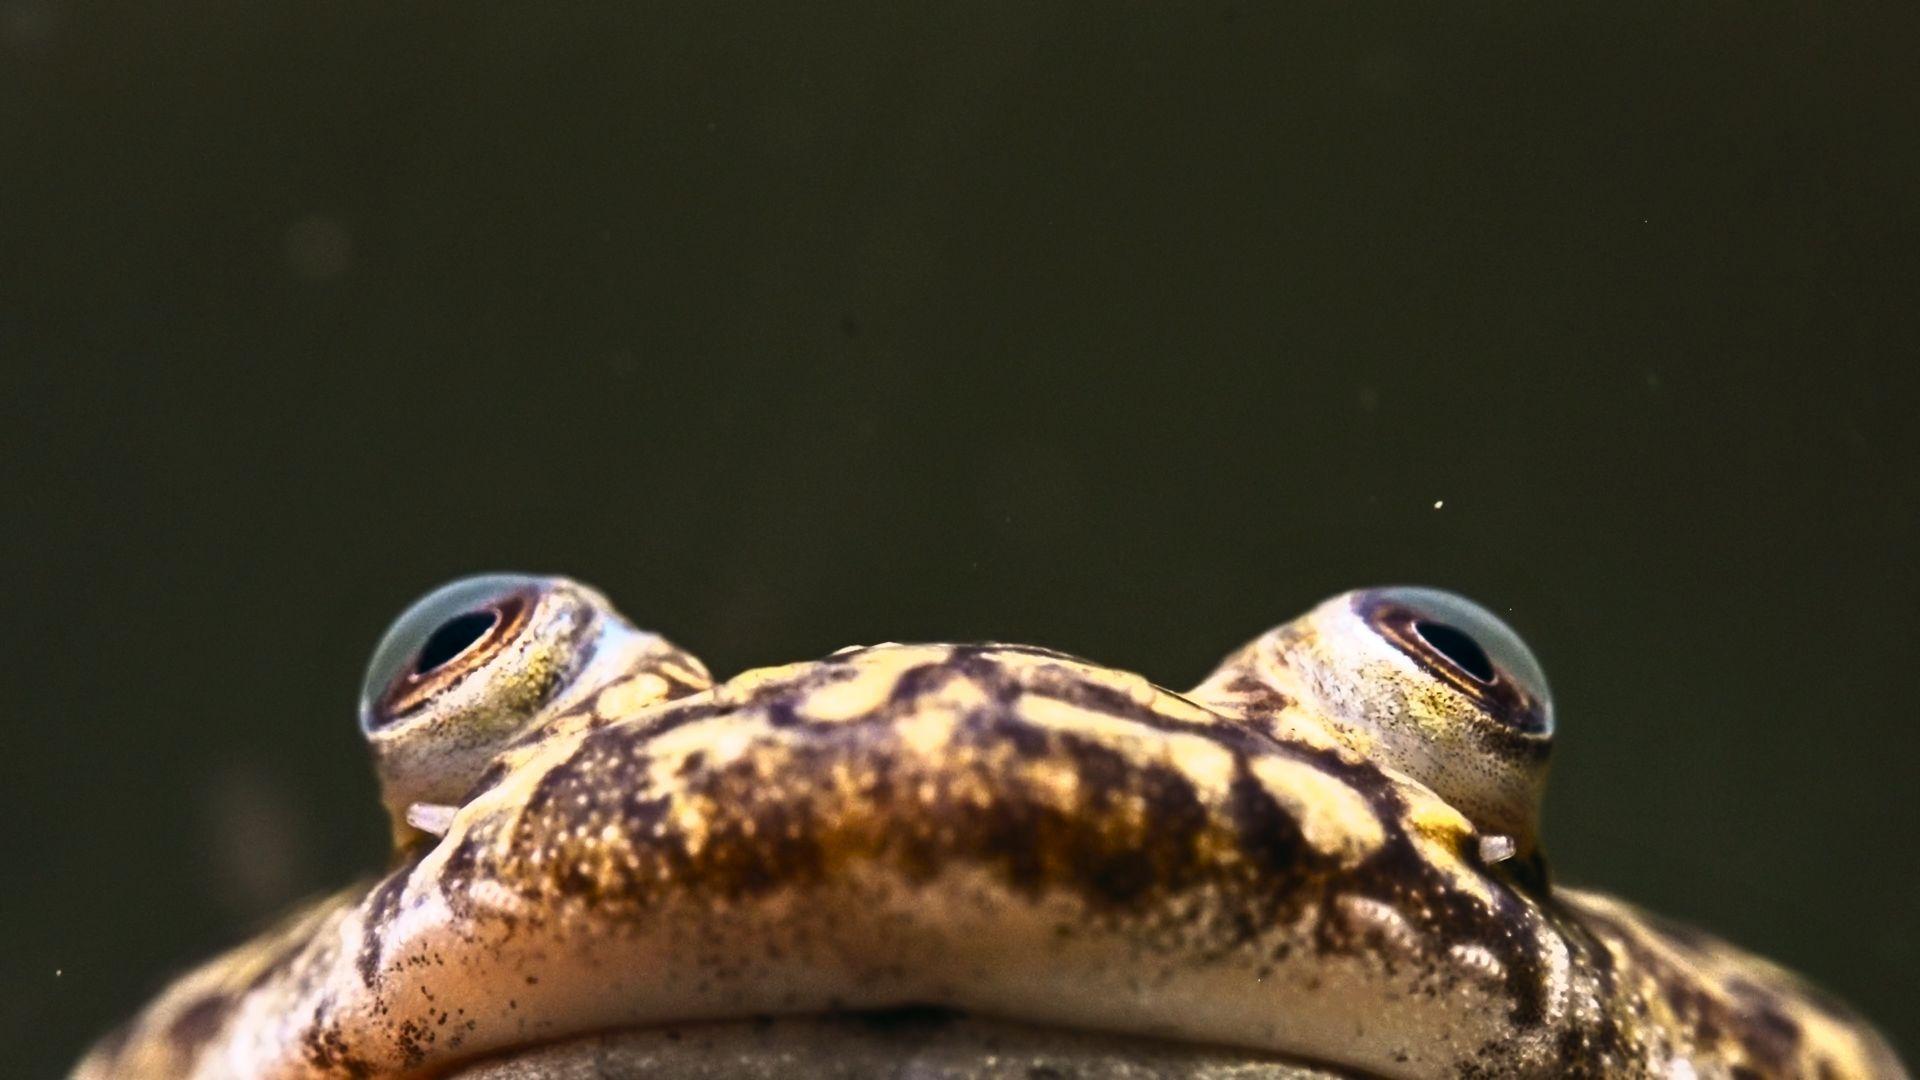 How This Frog Changed Science